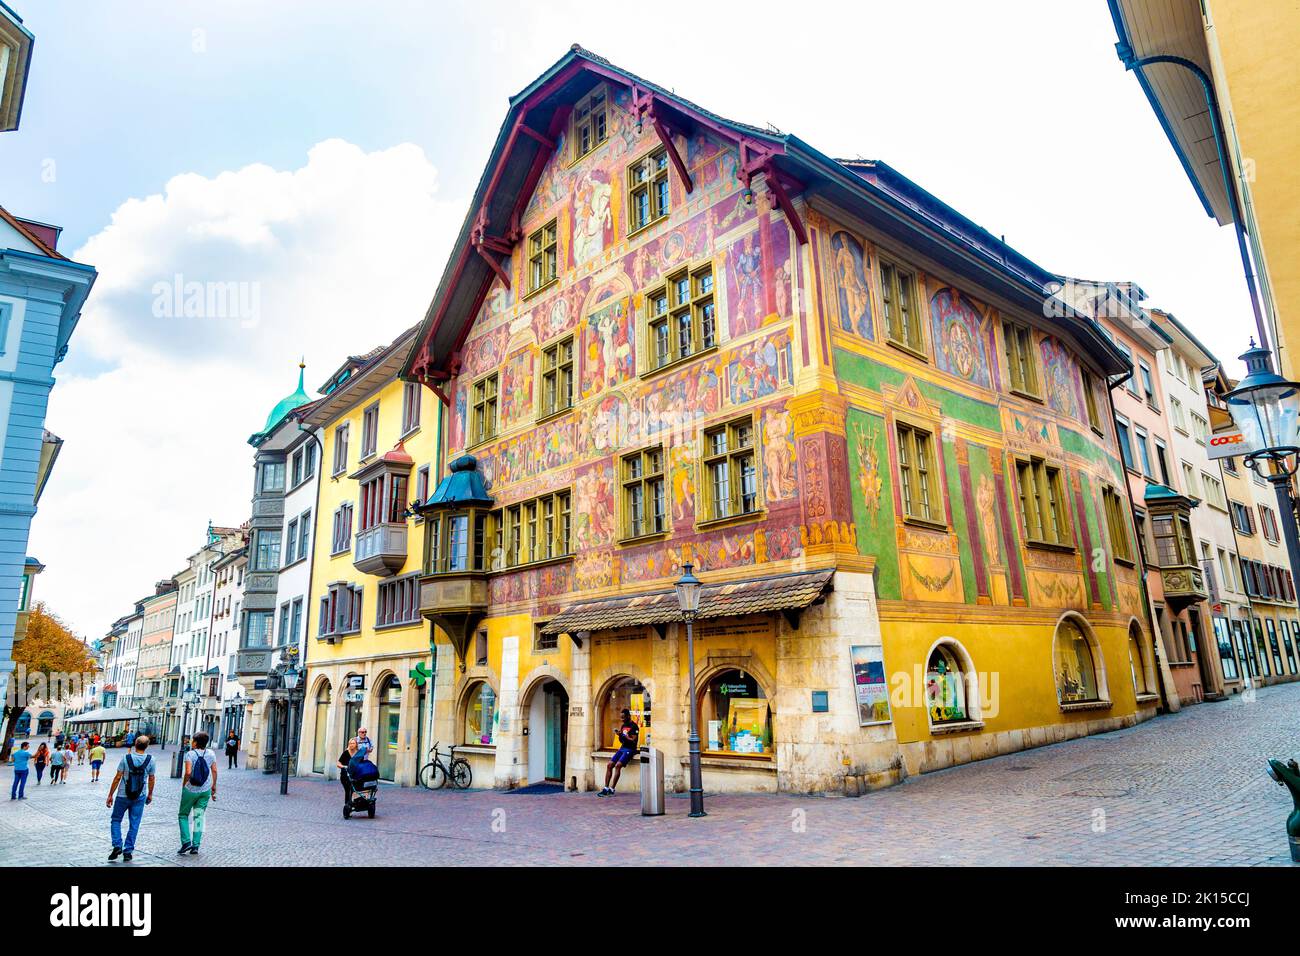 Exterior of Haus zum Ritter town house with a colourful frecso painting by Tobias Stimmer on the facade, Schaffhausen, Switzerland Stock Photo